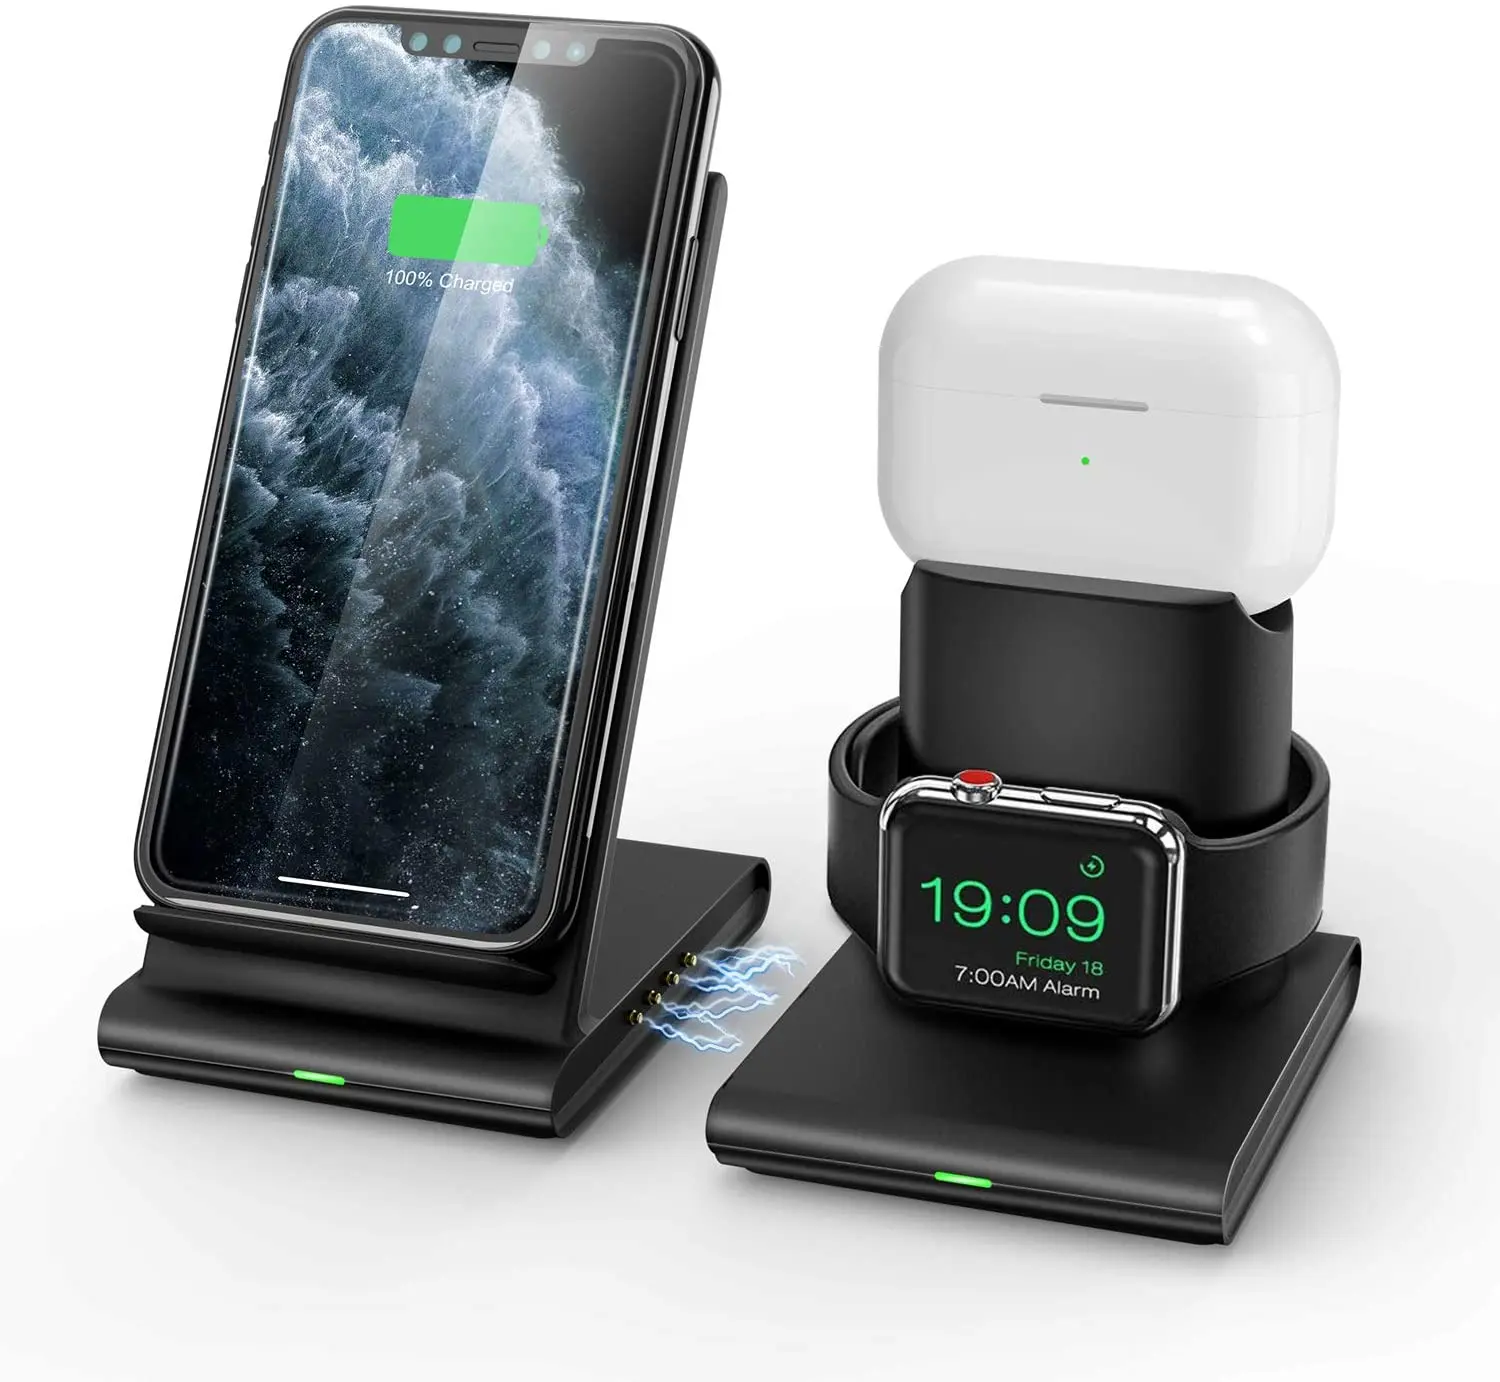 

Amazon best seller OEM Phone holder charging station Qi standard 10W Fast 3 in 1 wireless charger pad For AirPods, Apple watch